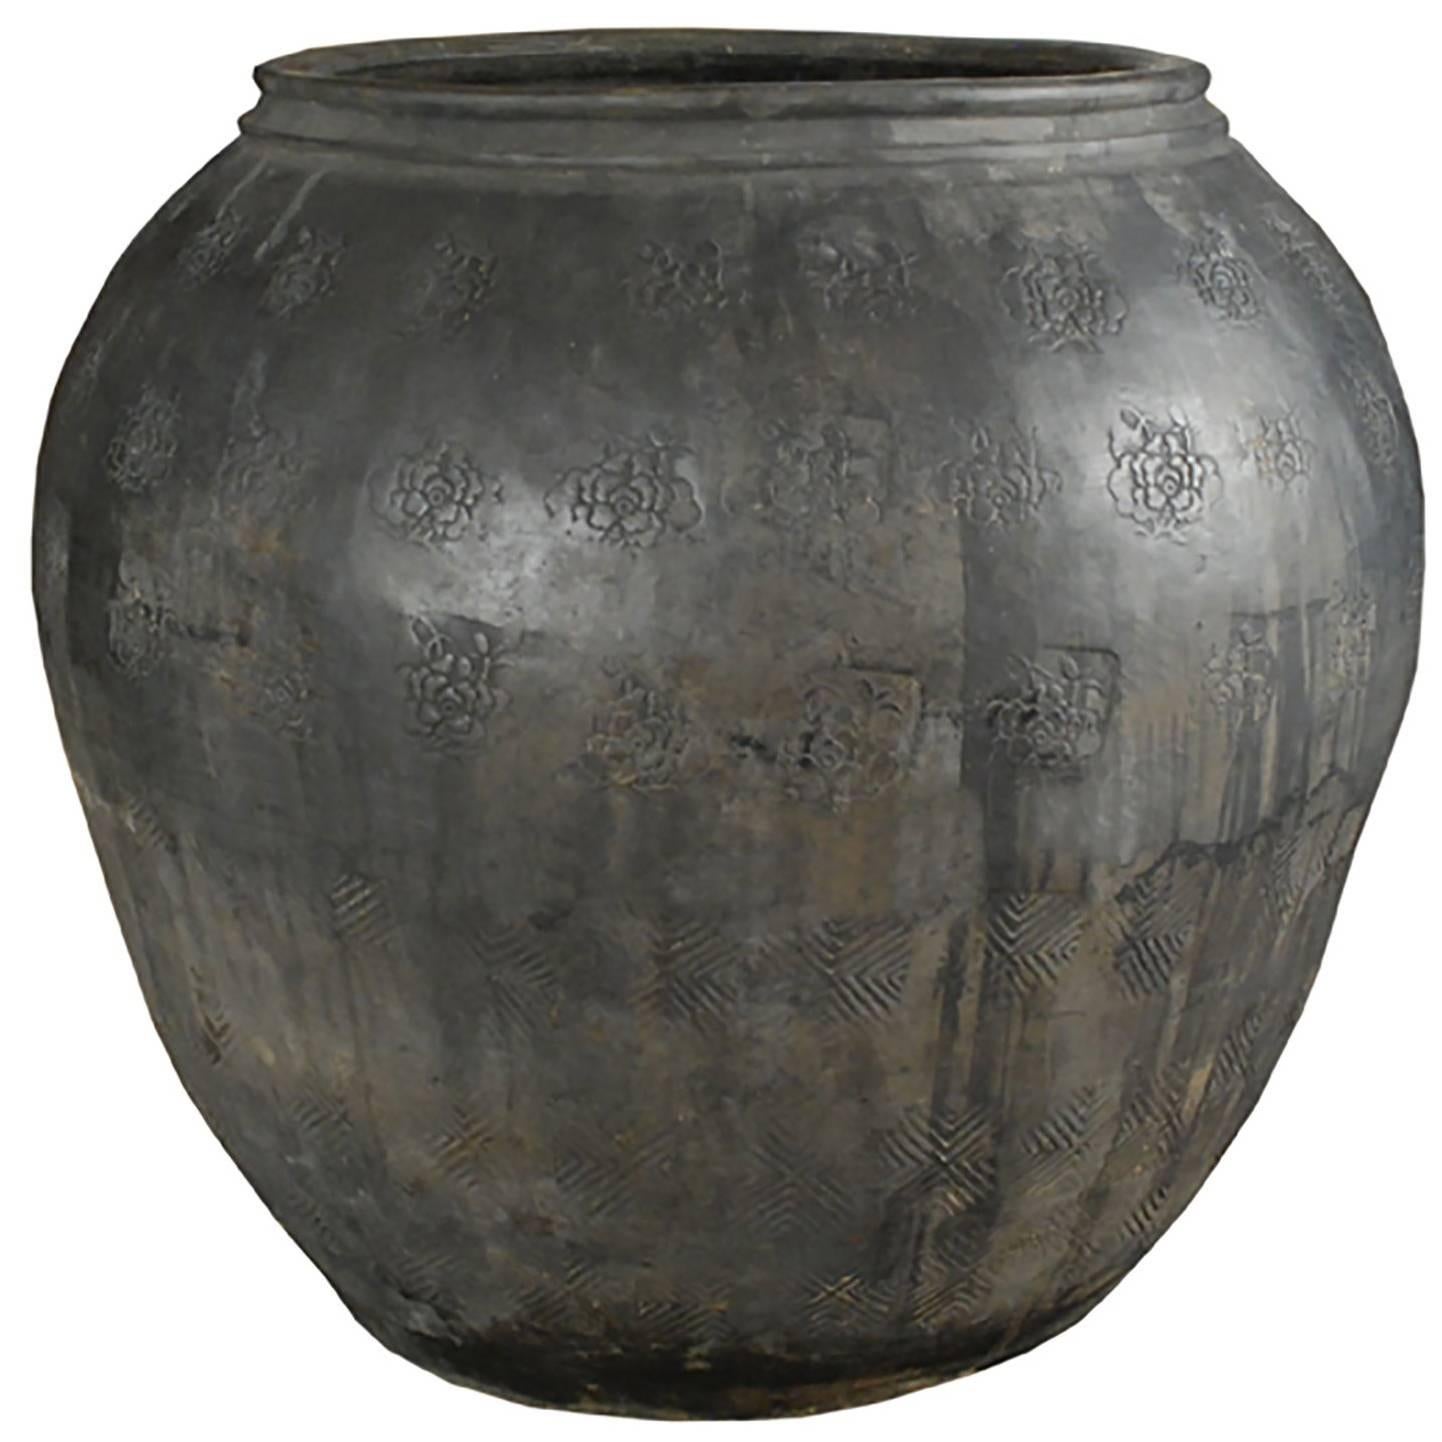 Chinese Stamped Clay Jar